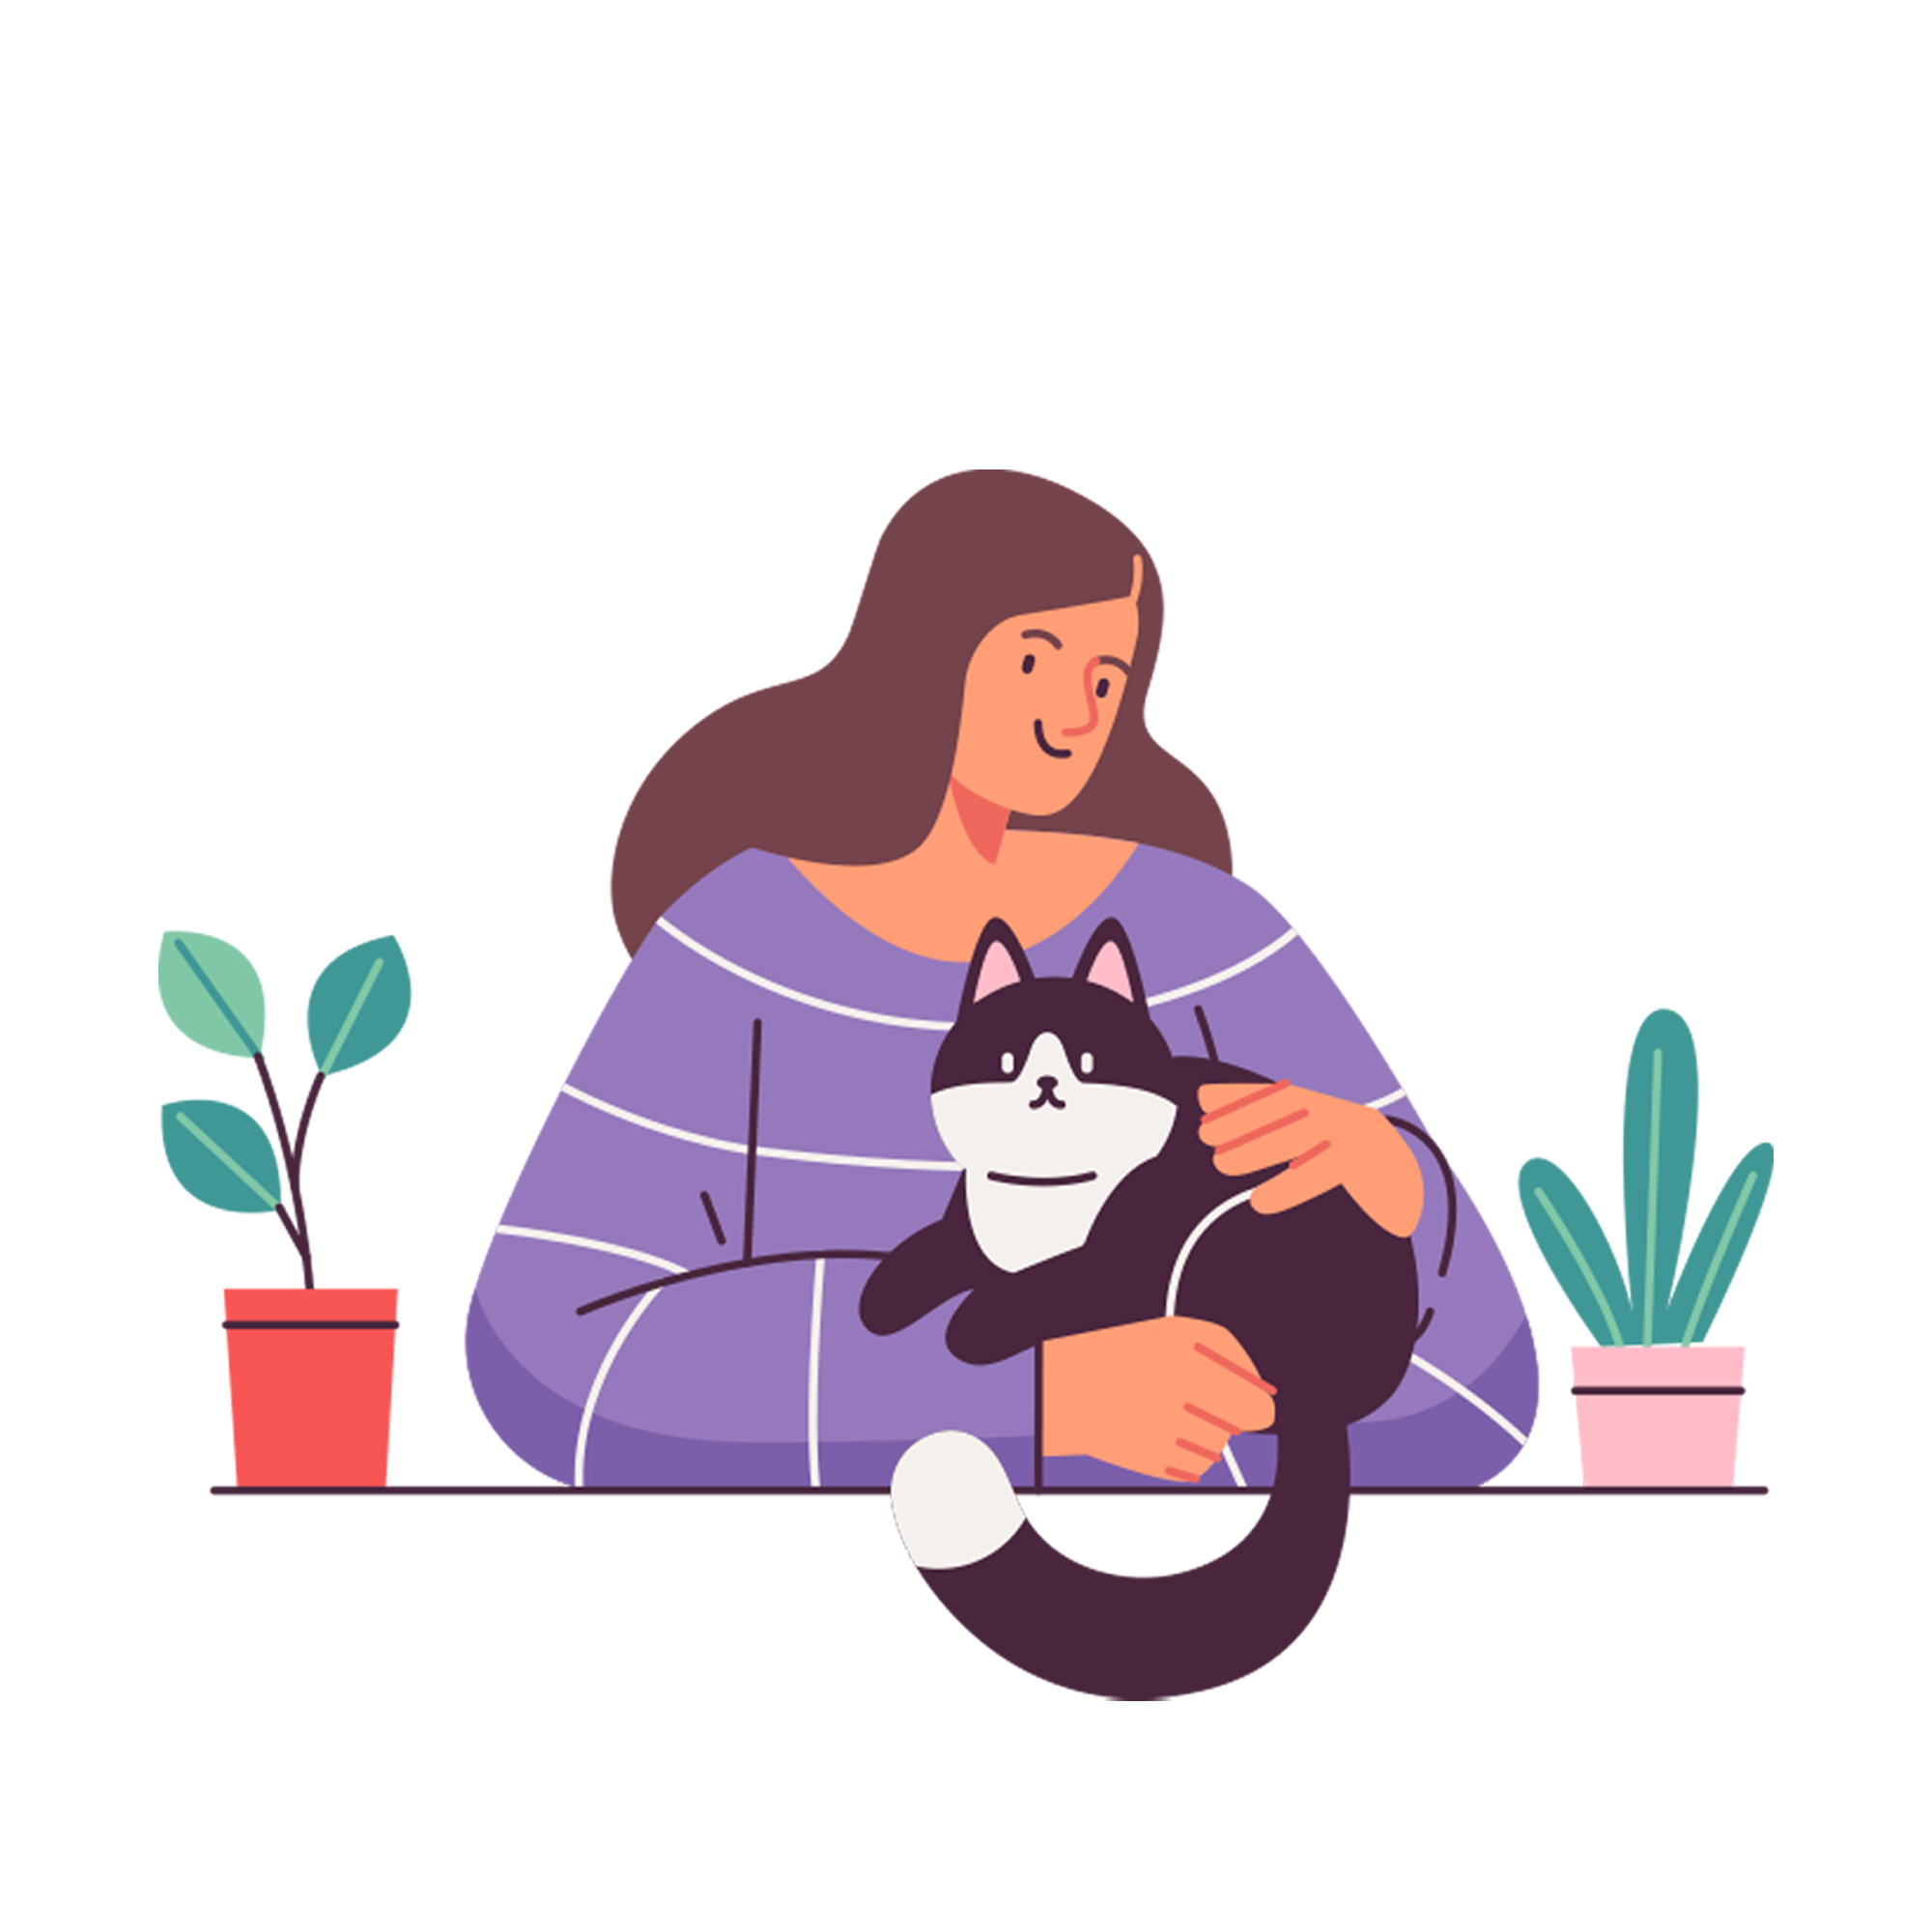 A woman holding a cat with a cartoon style illustration.